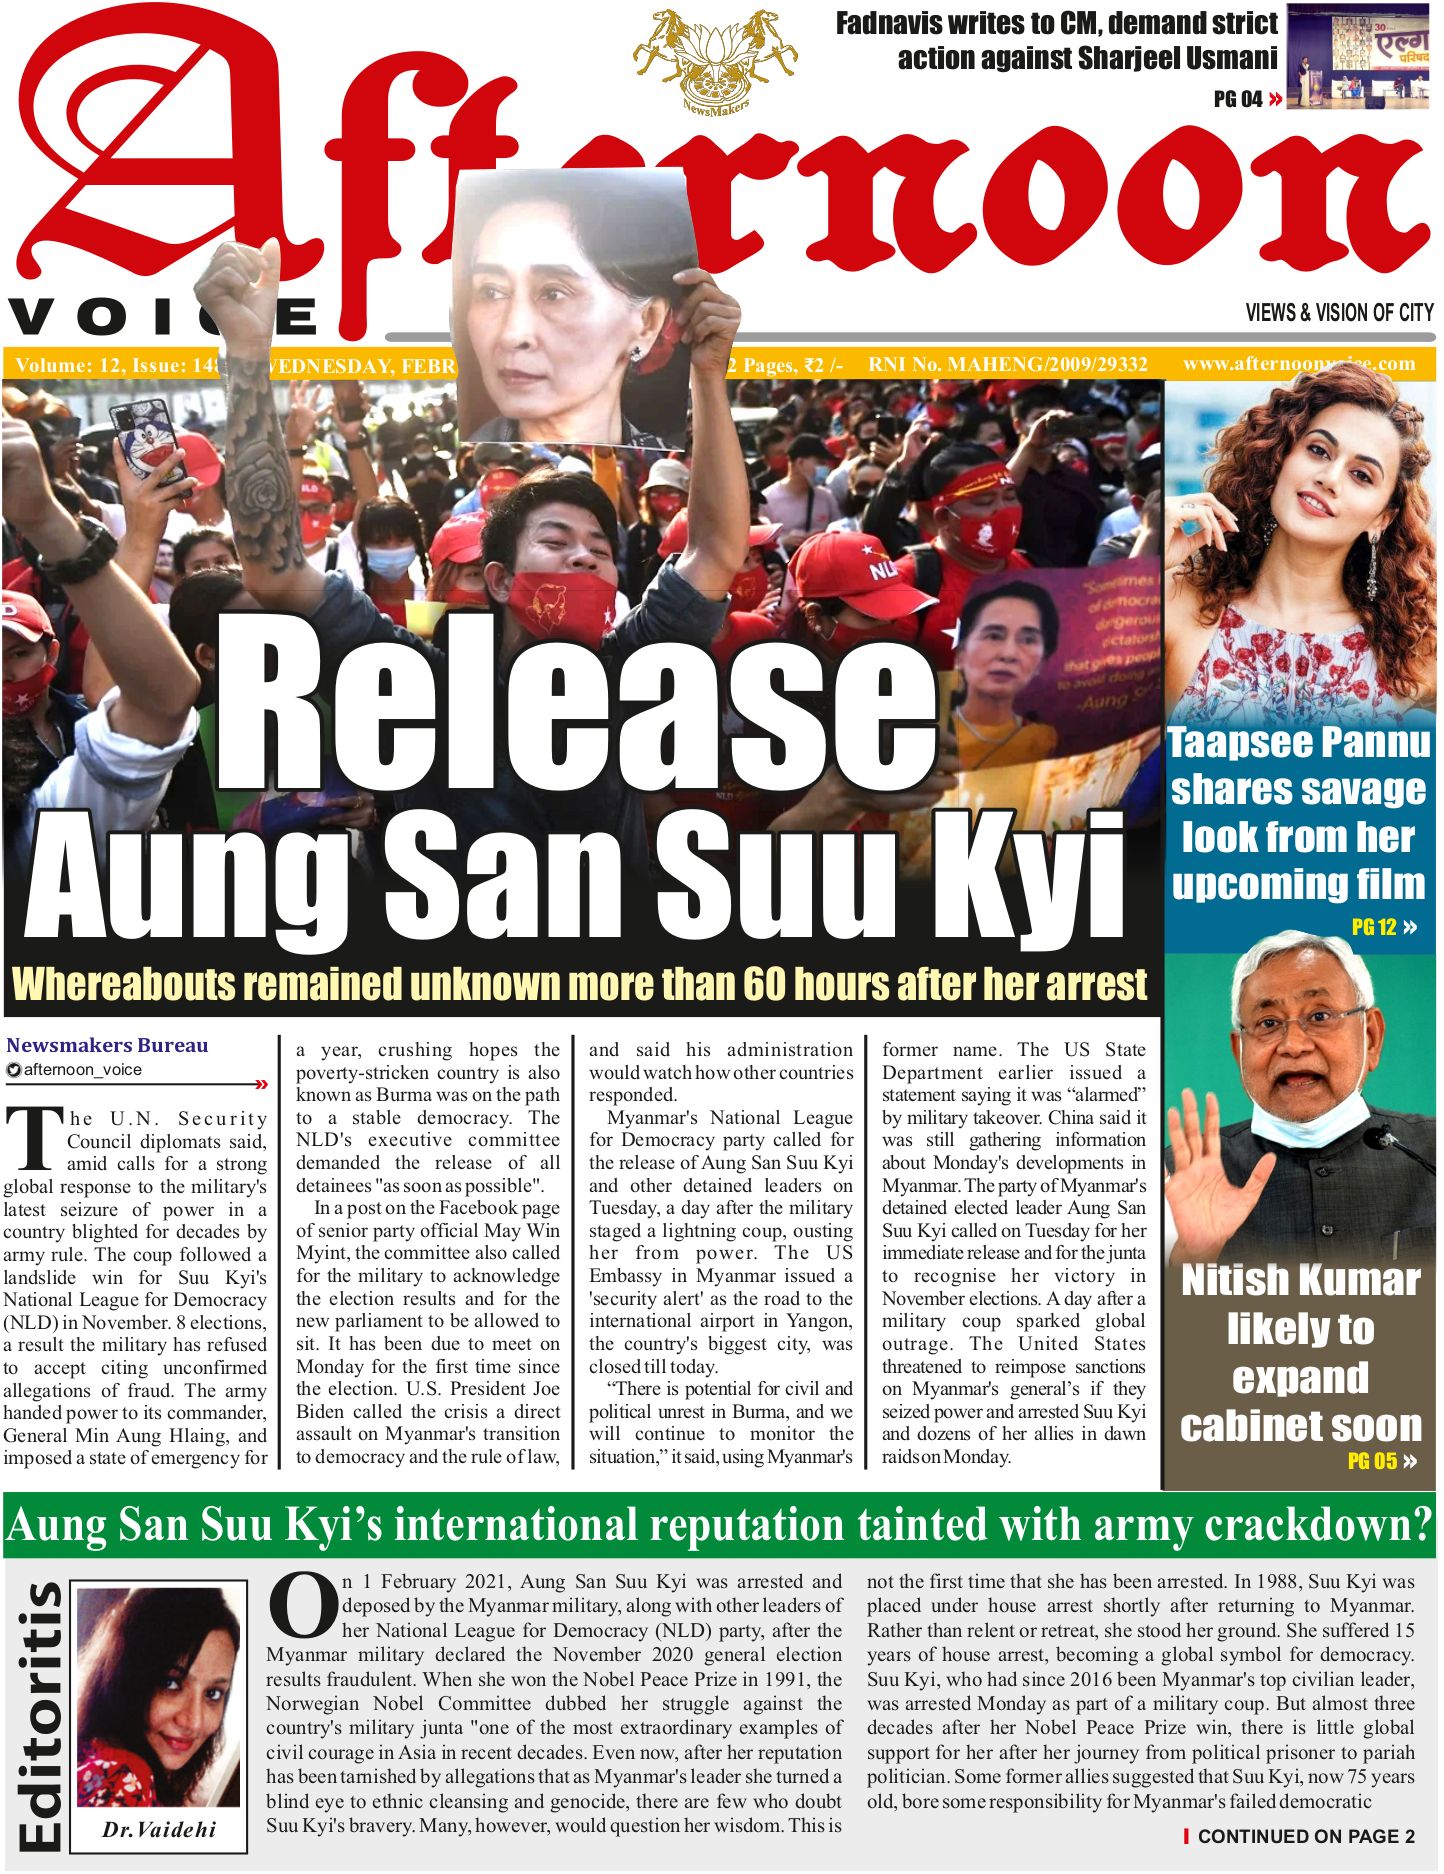 03 February 21 Page 1 Online English News Paper Daily News Epaper Today Newspaper